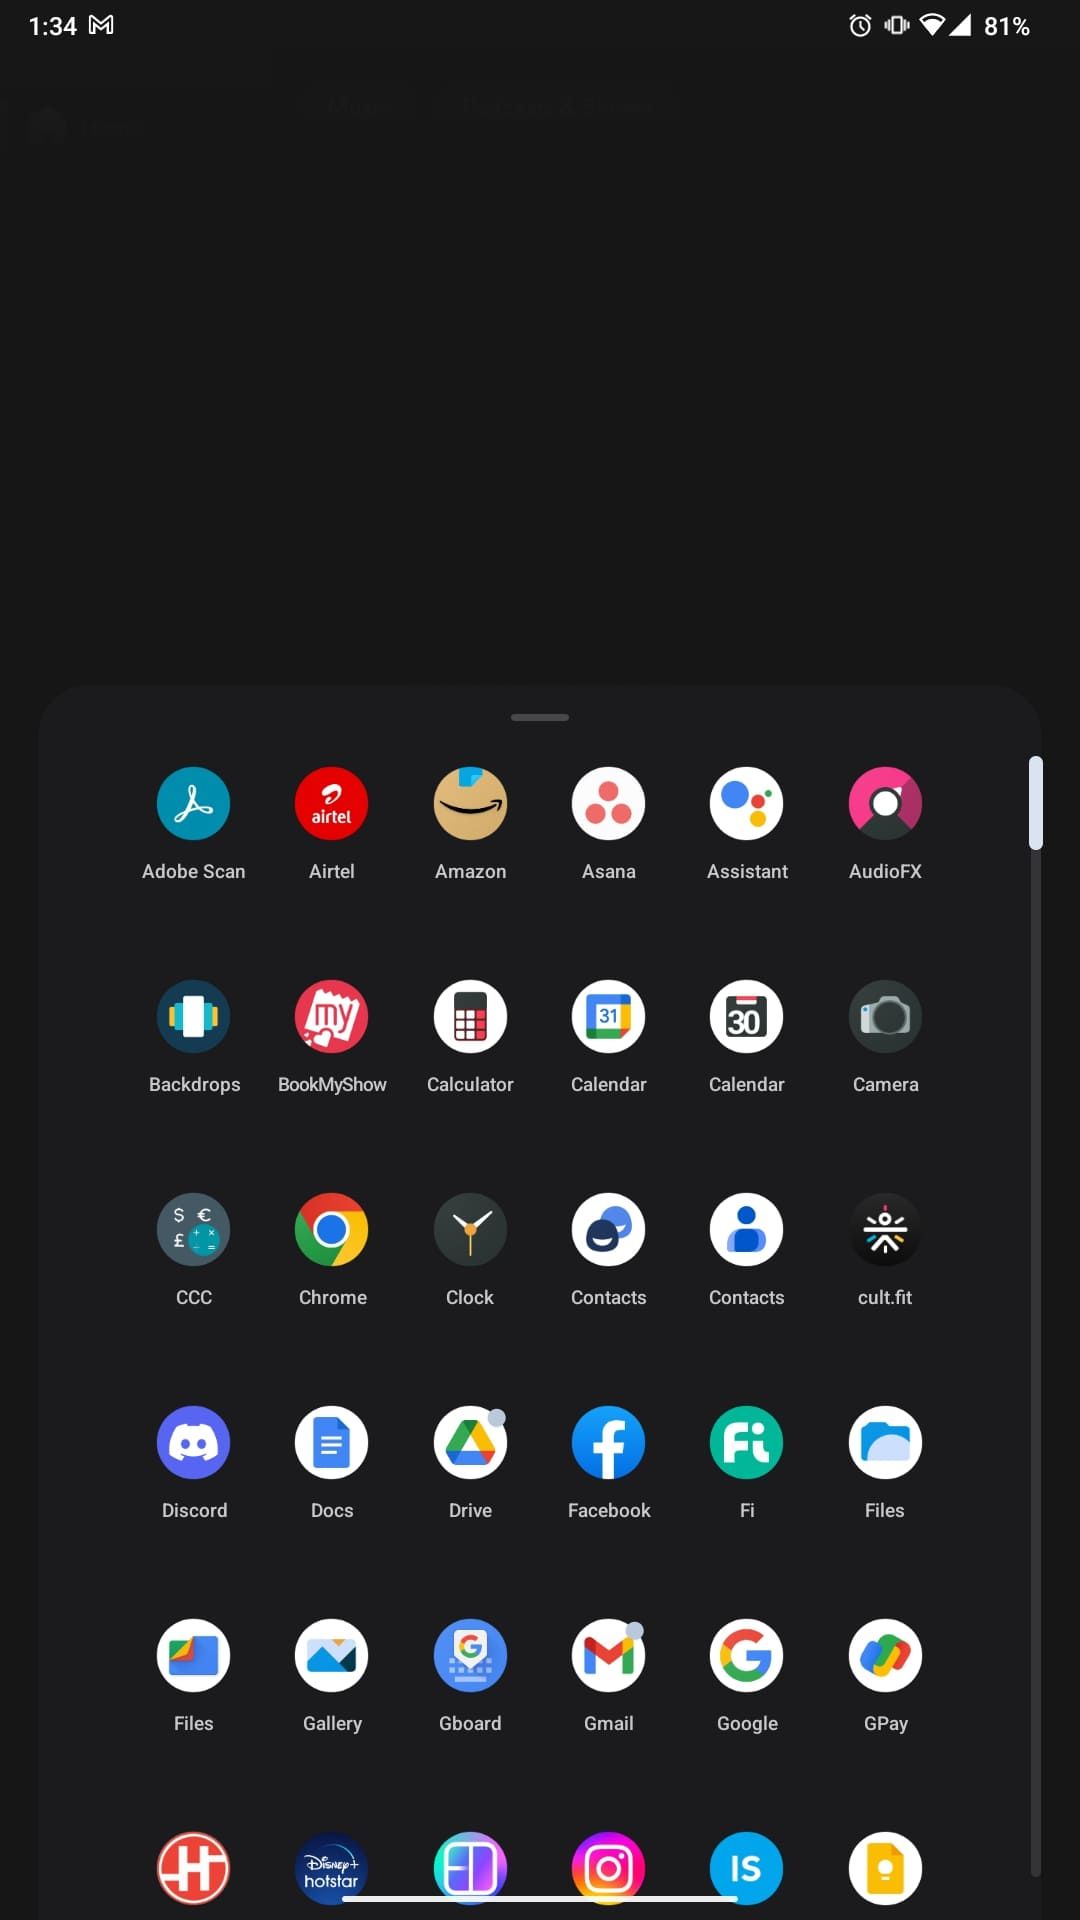 App drawer in tablet layout